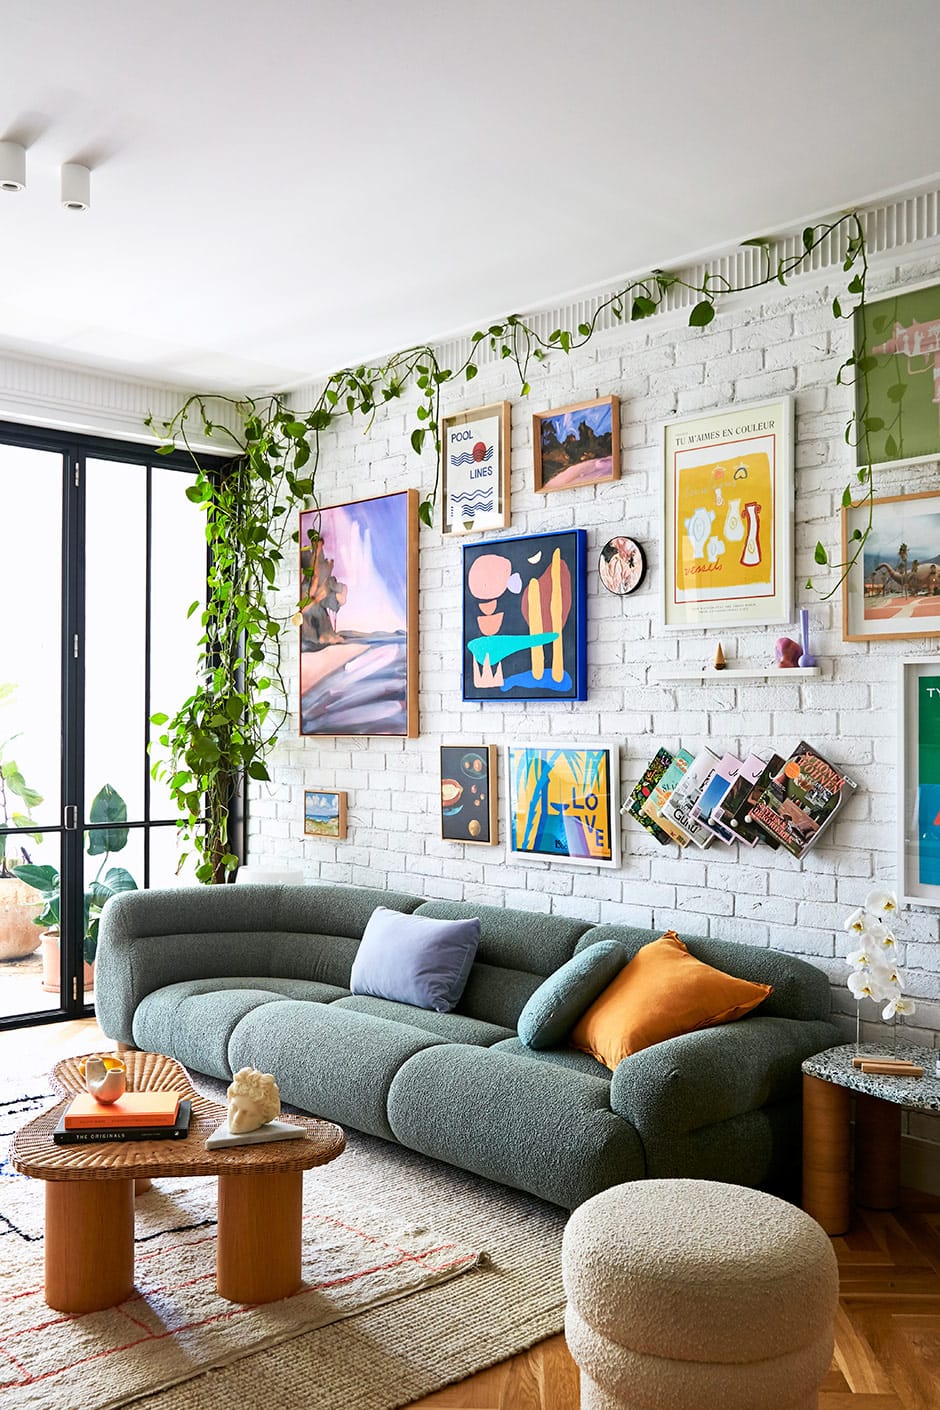 The magic happened slowly but surely at interior designer Jono Fleming’s small-space Sydney apartment